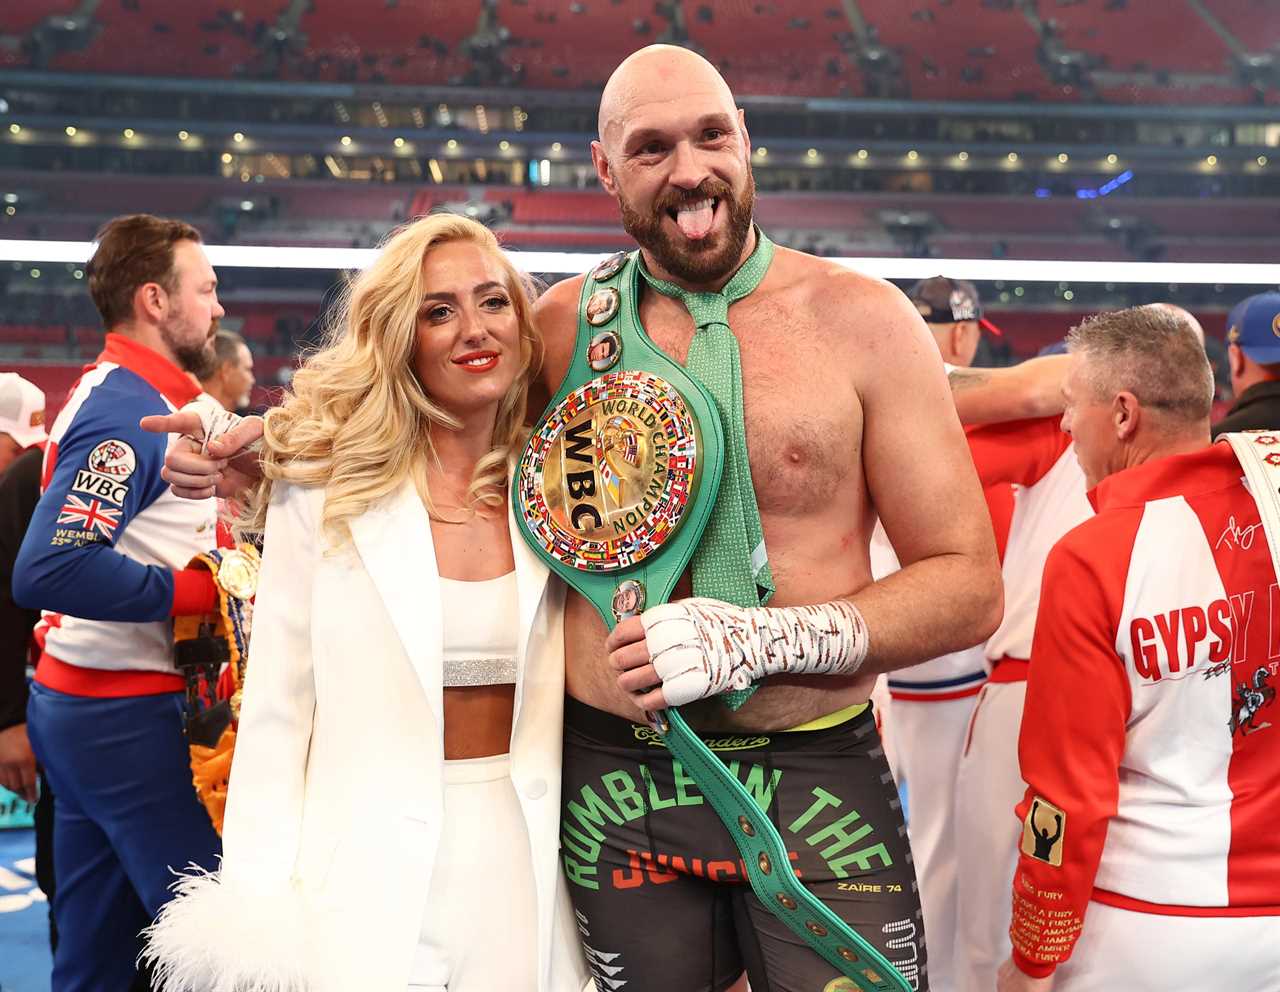 Tyson Fury: I could end up having brain damage - Tyson Fury's revelations about the grueling Deontay Wilder trilogy that forced him into retirement